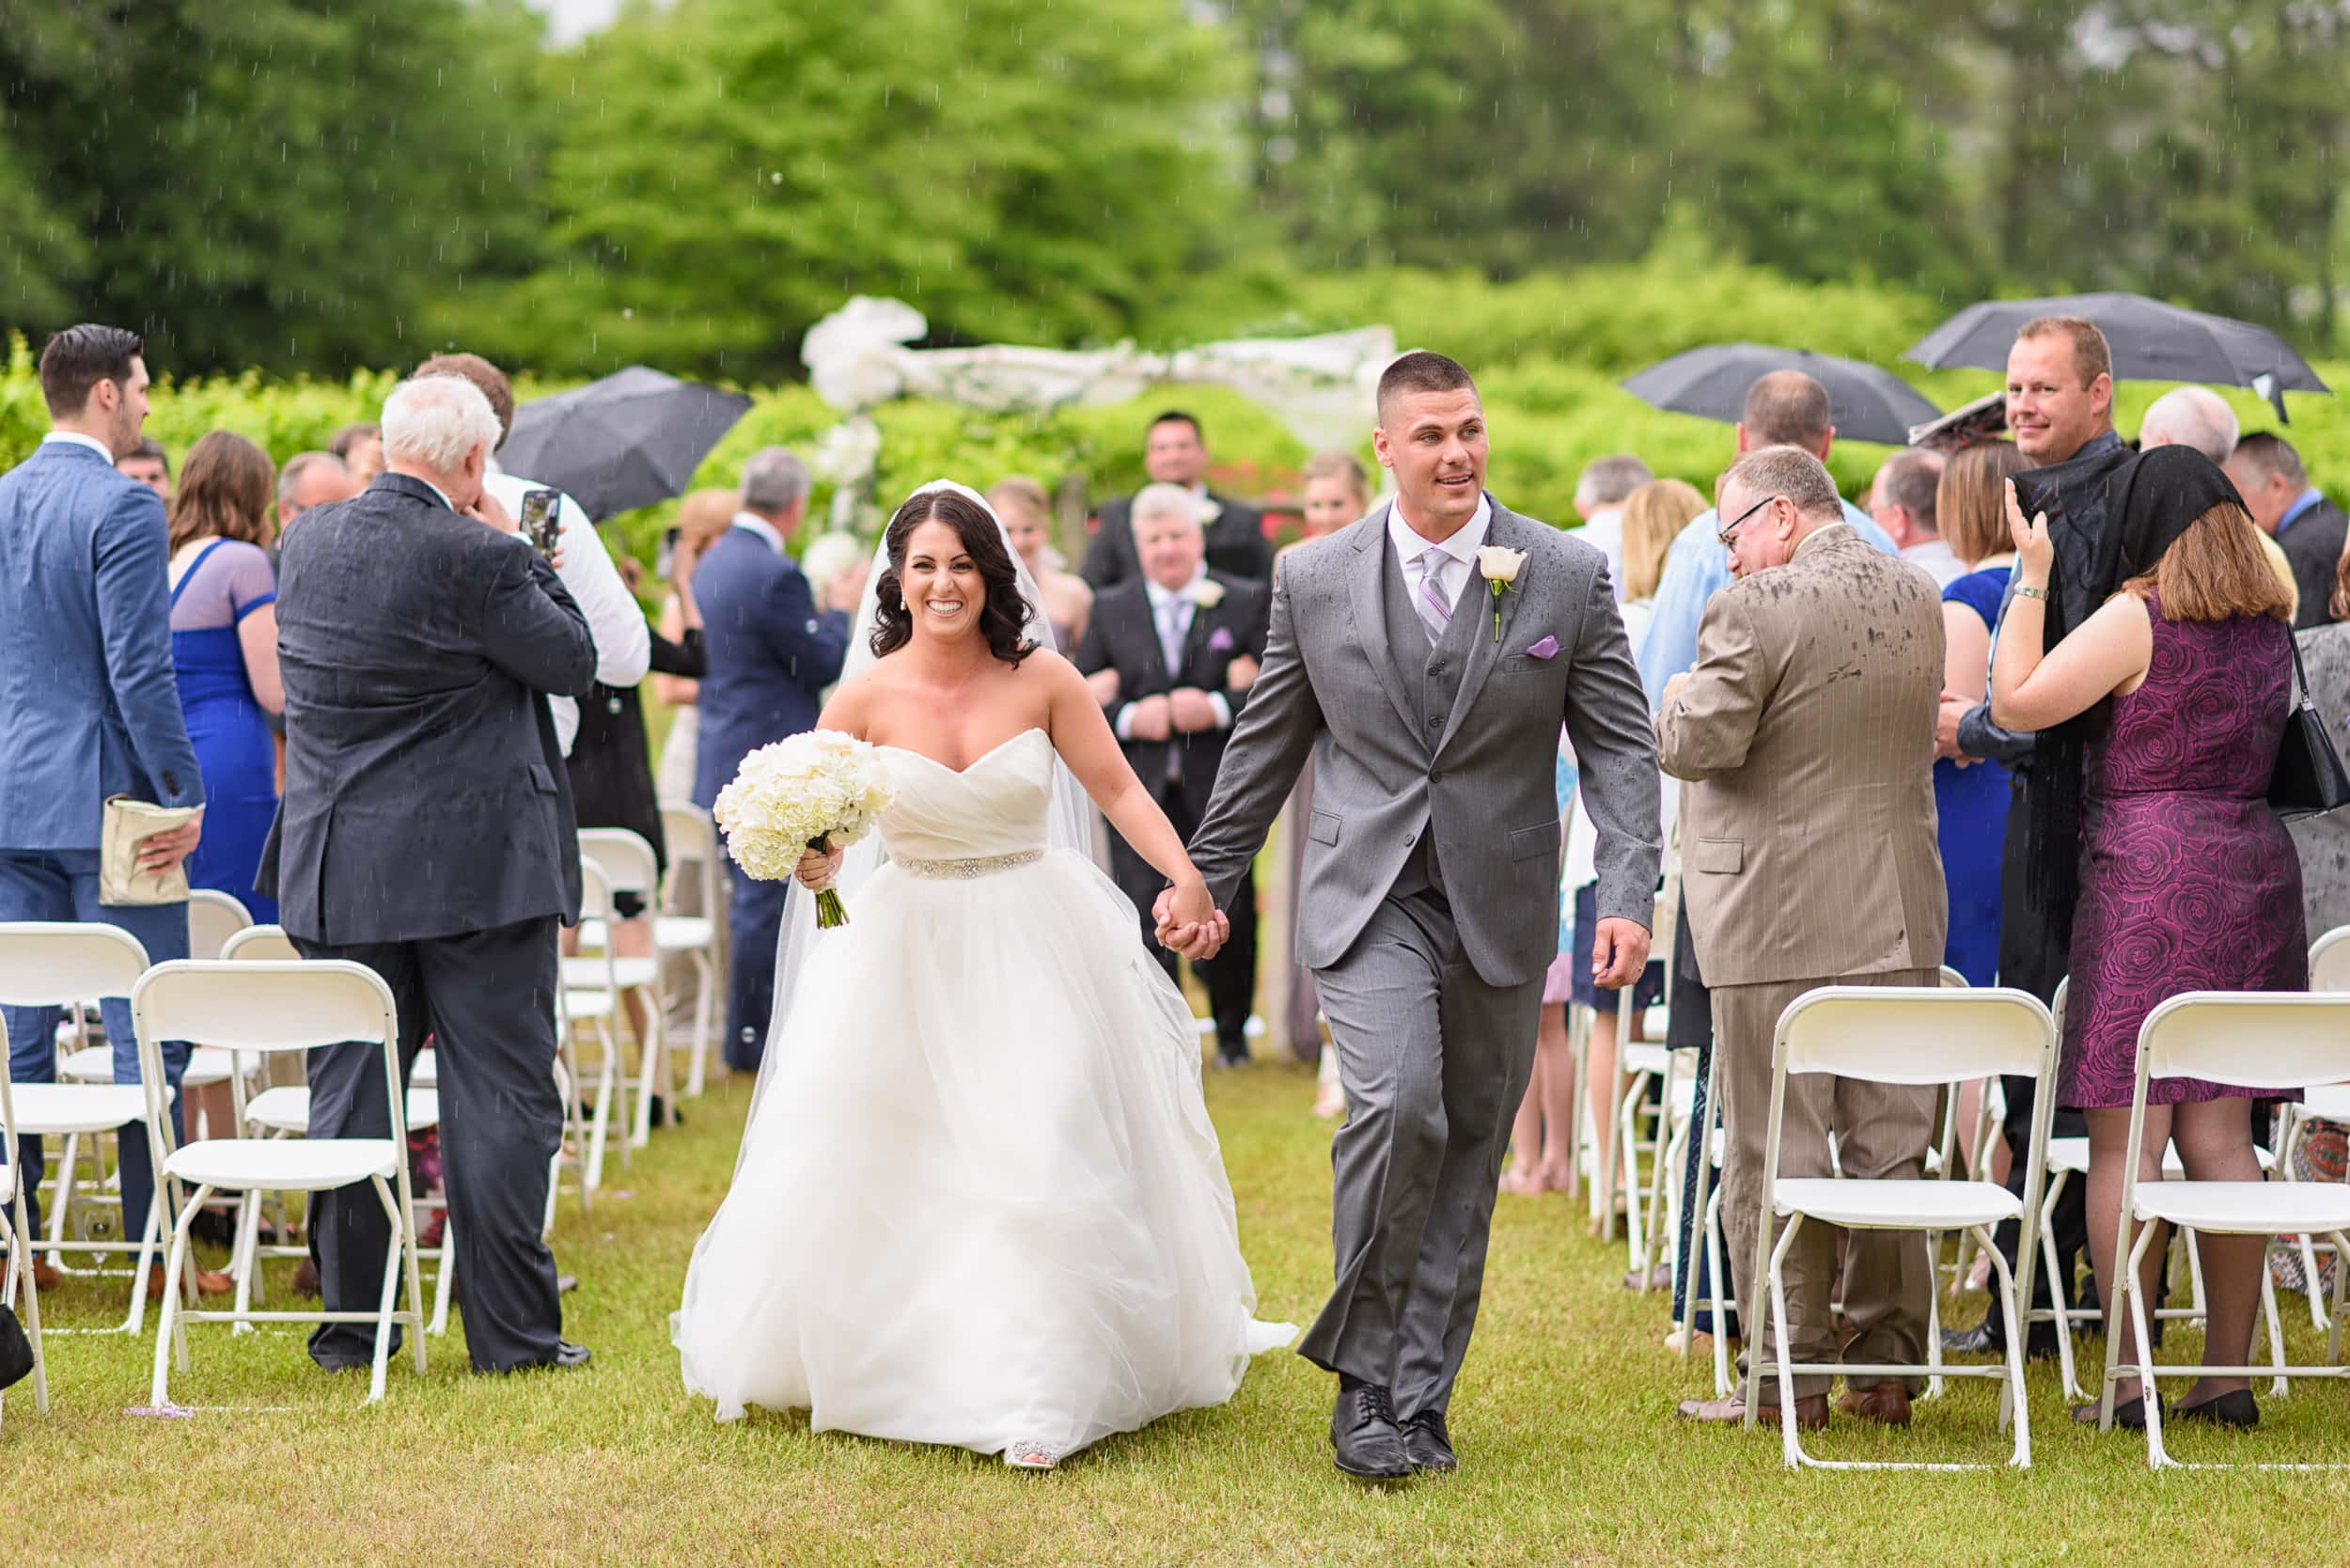 Running from the rain after the ceremony - La Belle Amie Vineyard